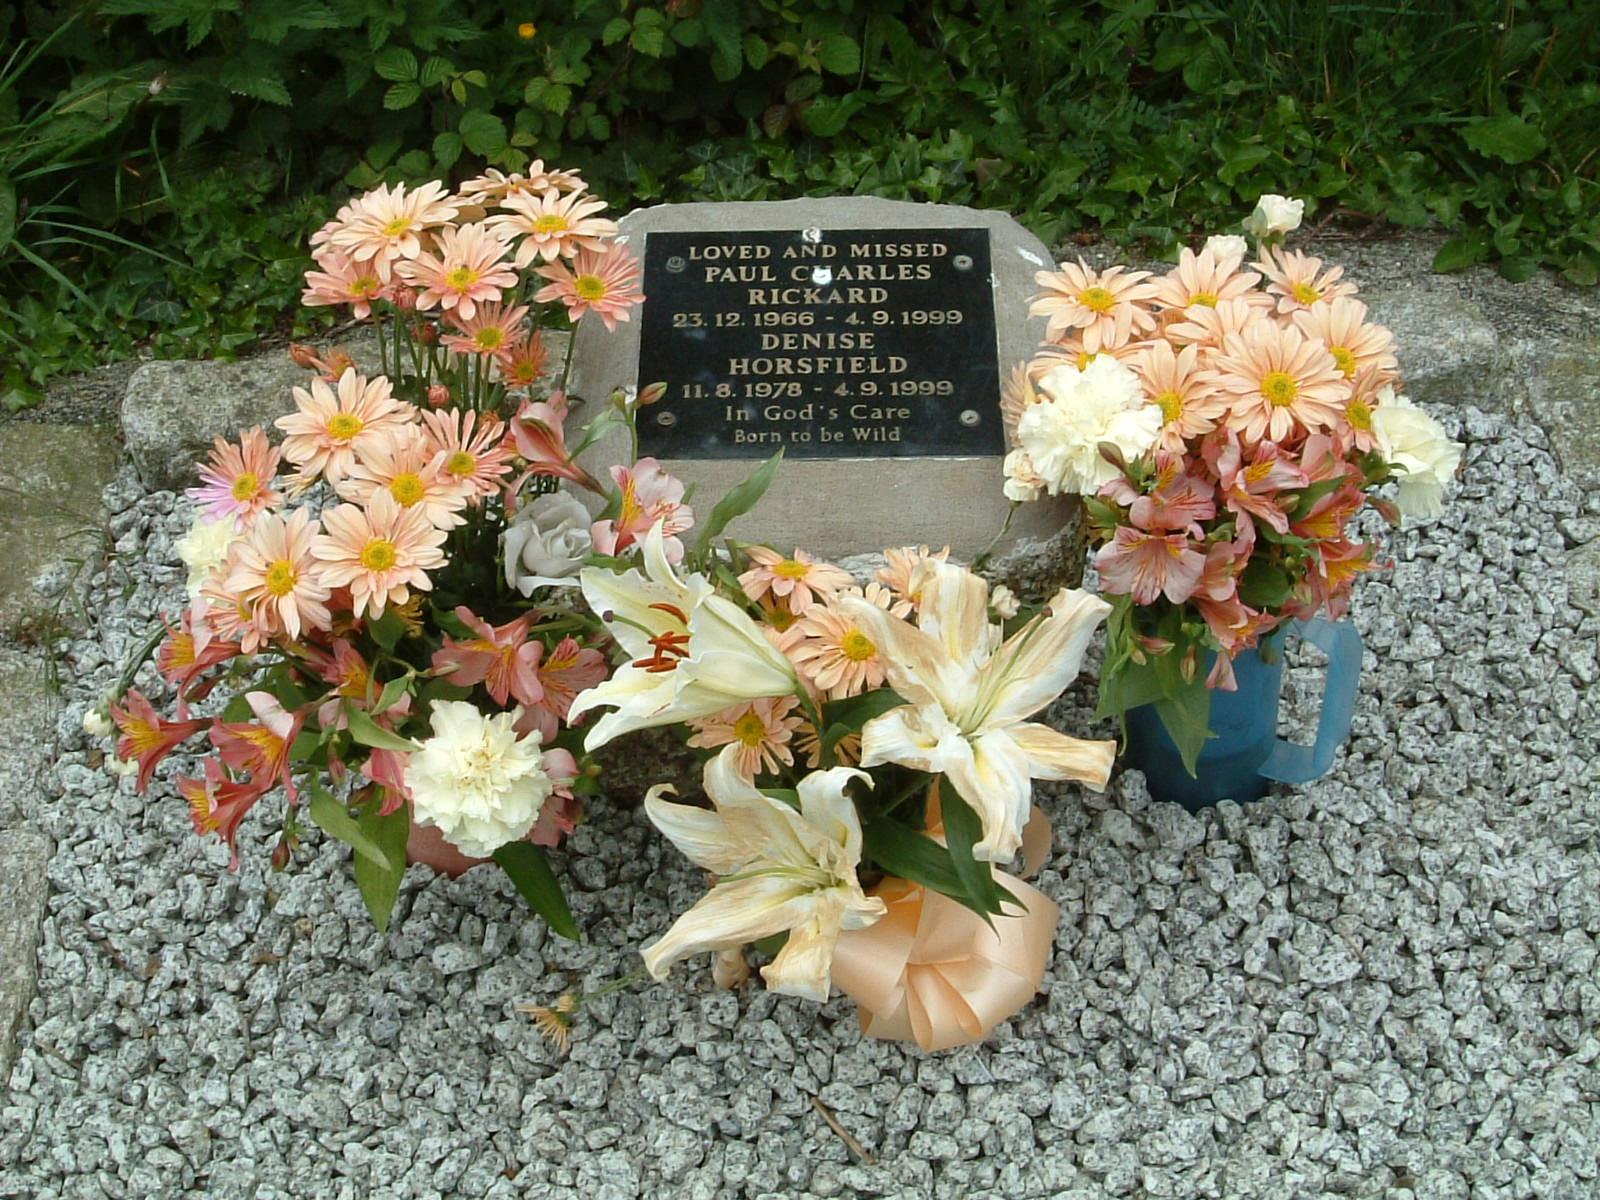 An accident memorial in Narrow Lane